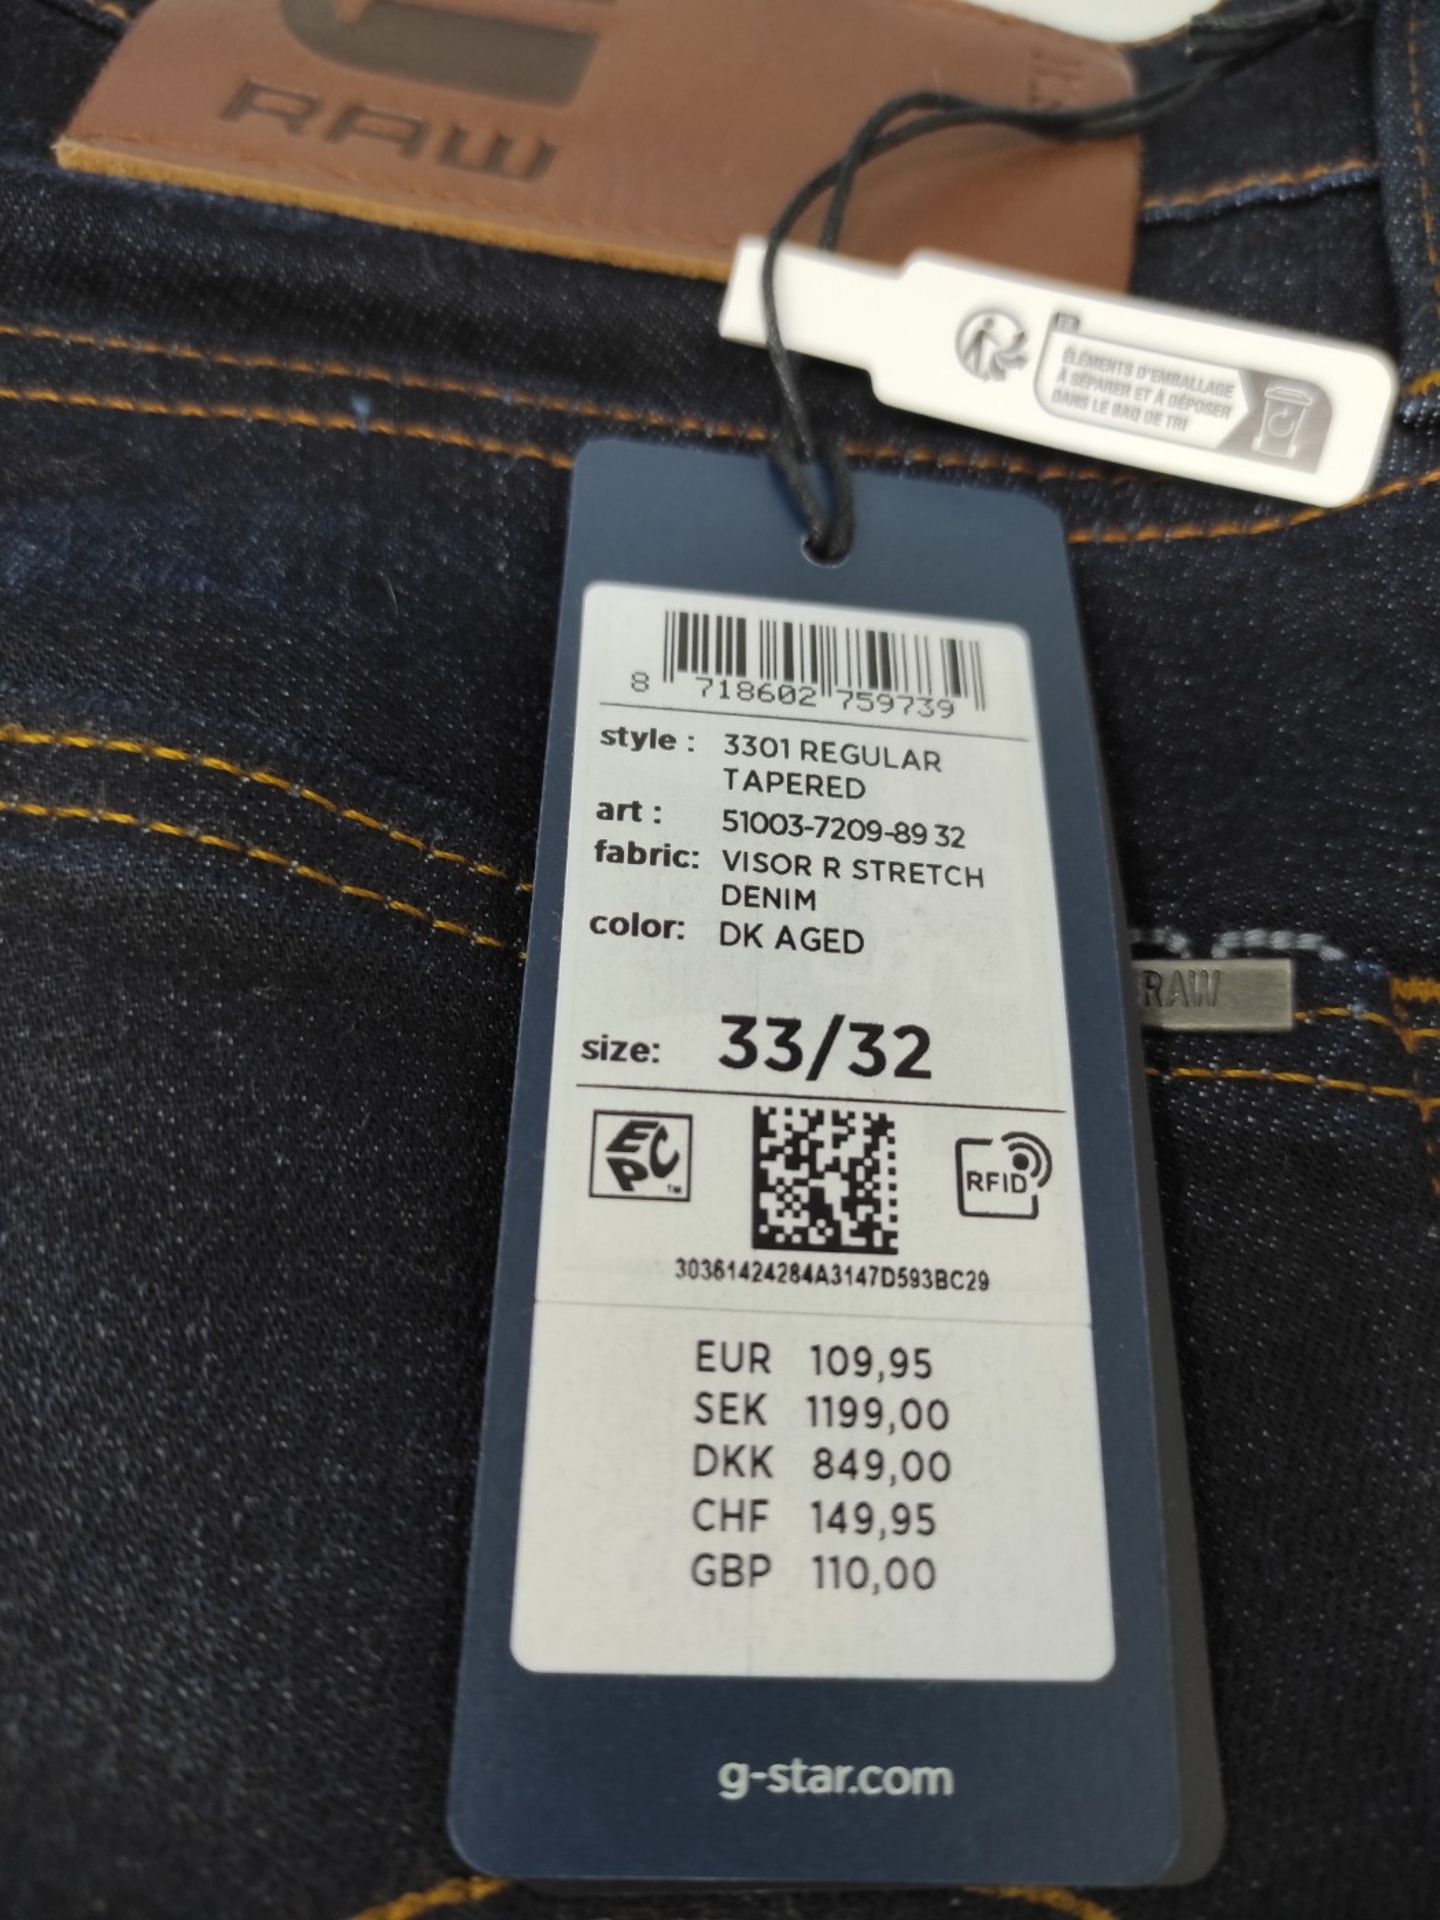 RRP £91.00 G-Star Raw 3301 Regular Tapered Jeans Jeans men, Blue (Dk Aged 7209-89), 33W / 32L - Image 3 of 3